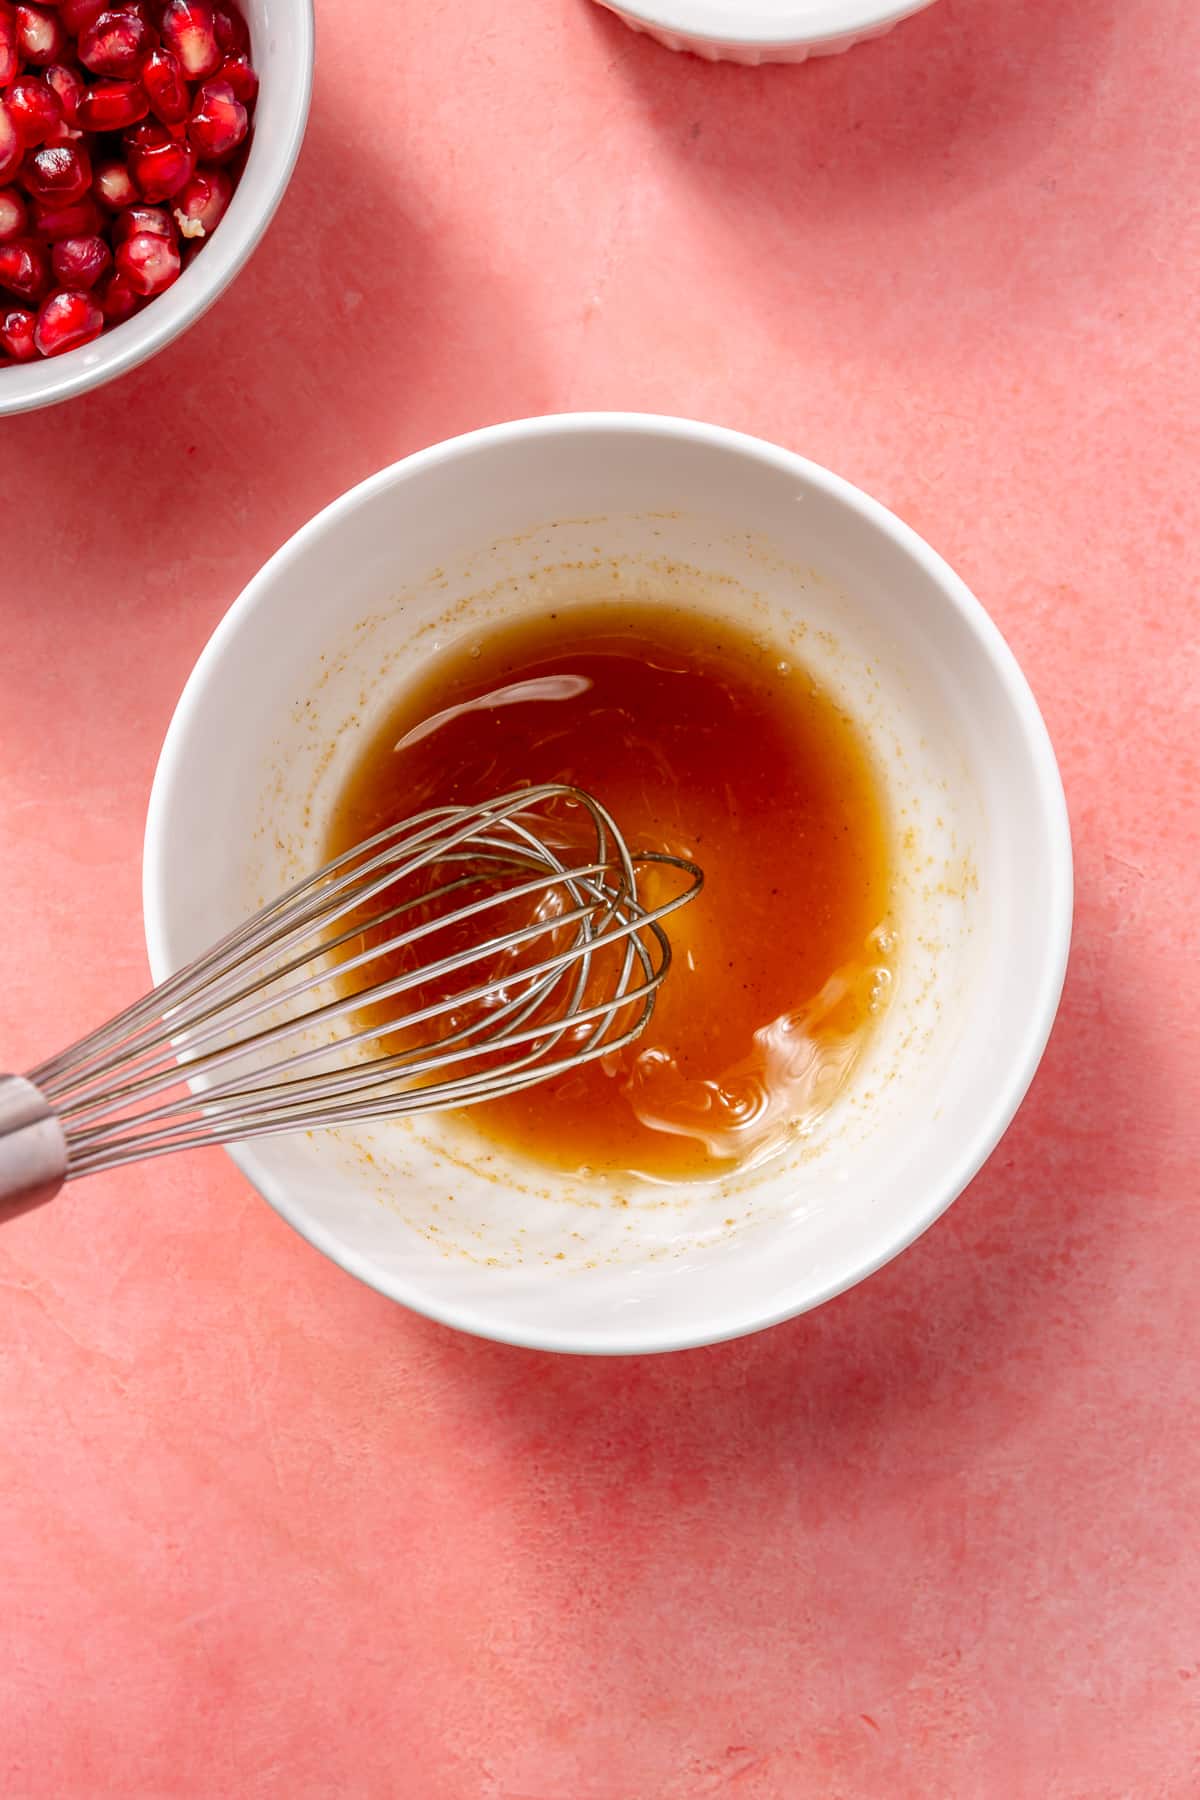 A whisk is shown mixing the golden-brown sauce.